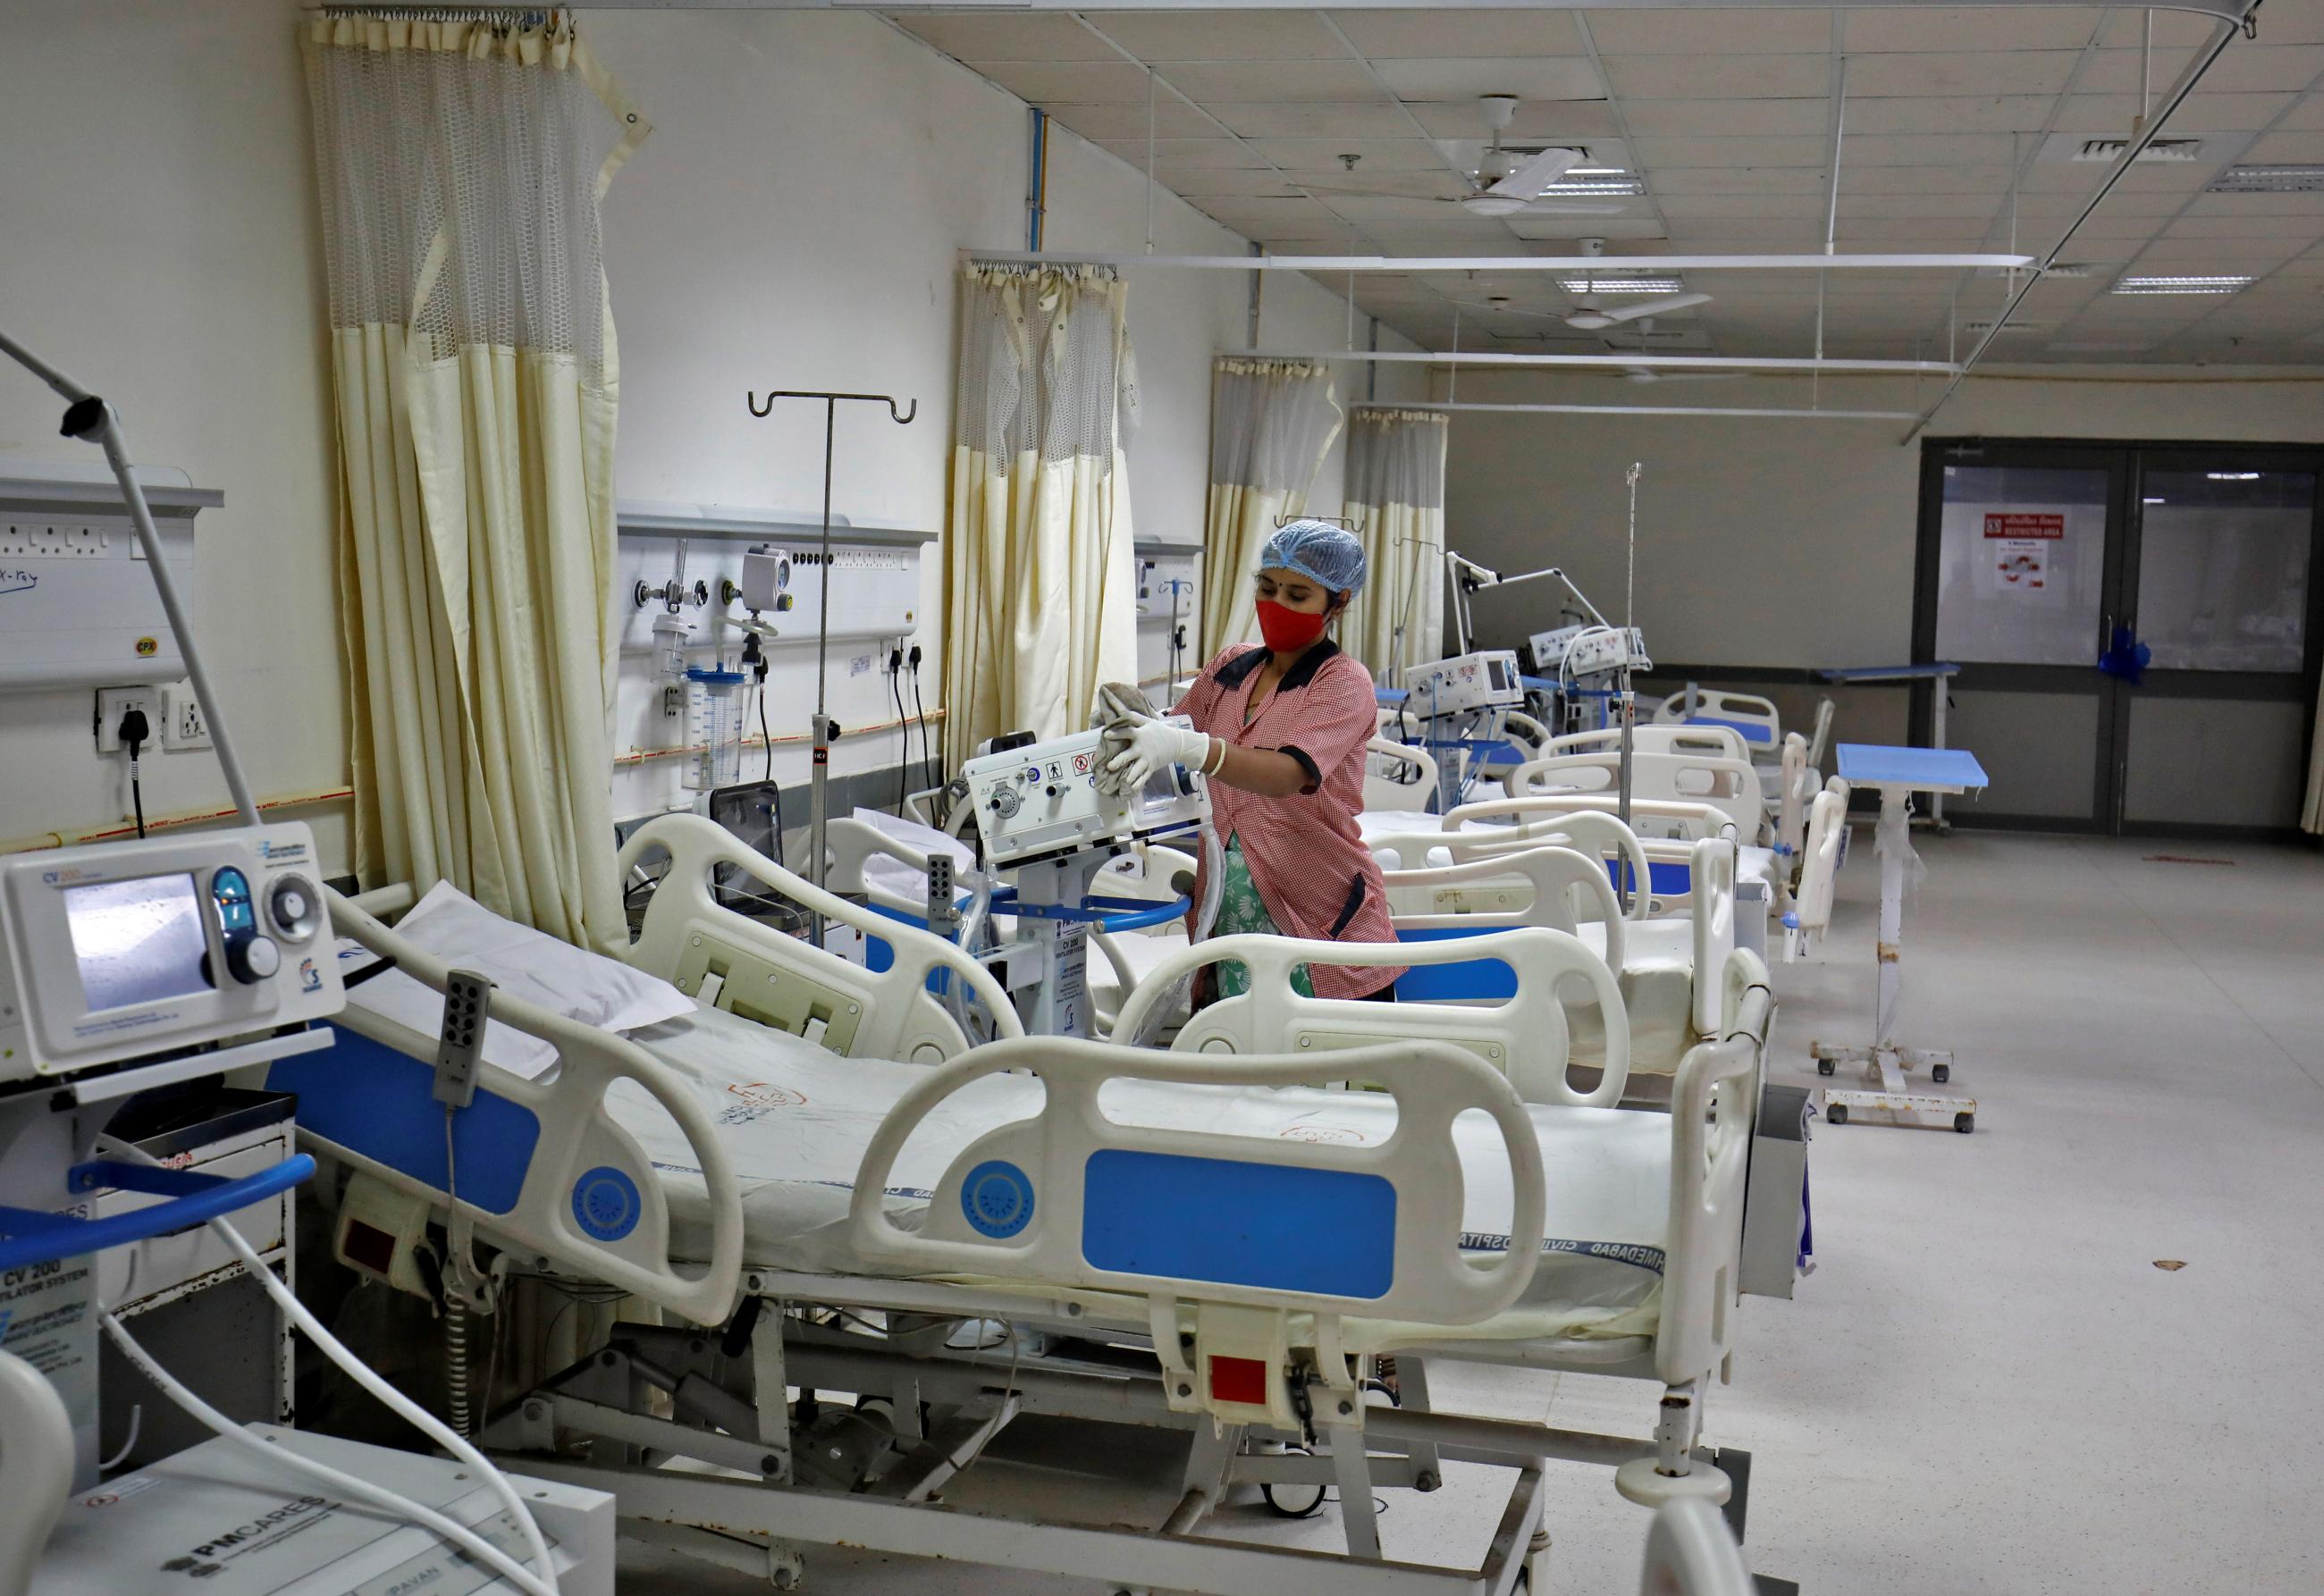 A staff member cleans medical equipment inside a ward at the Civil Hospital in Ahmedabad, India, December 6, 2021.